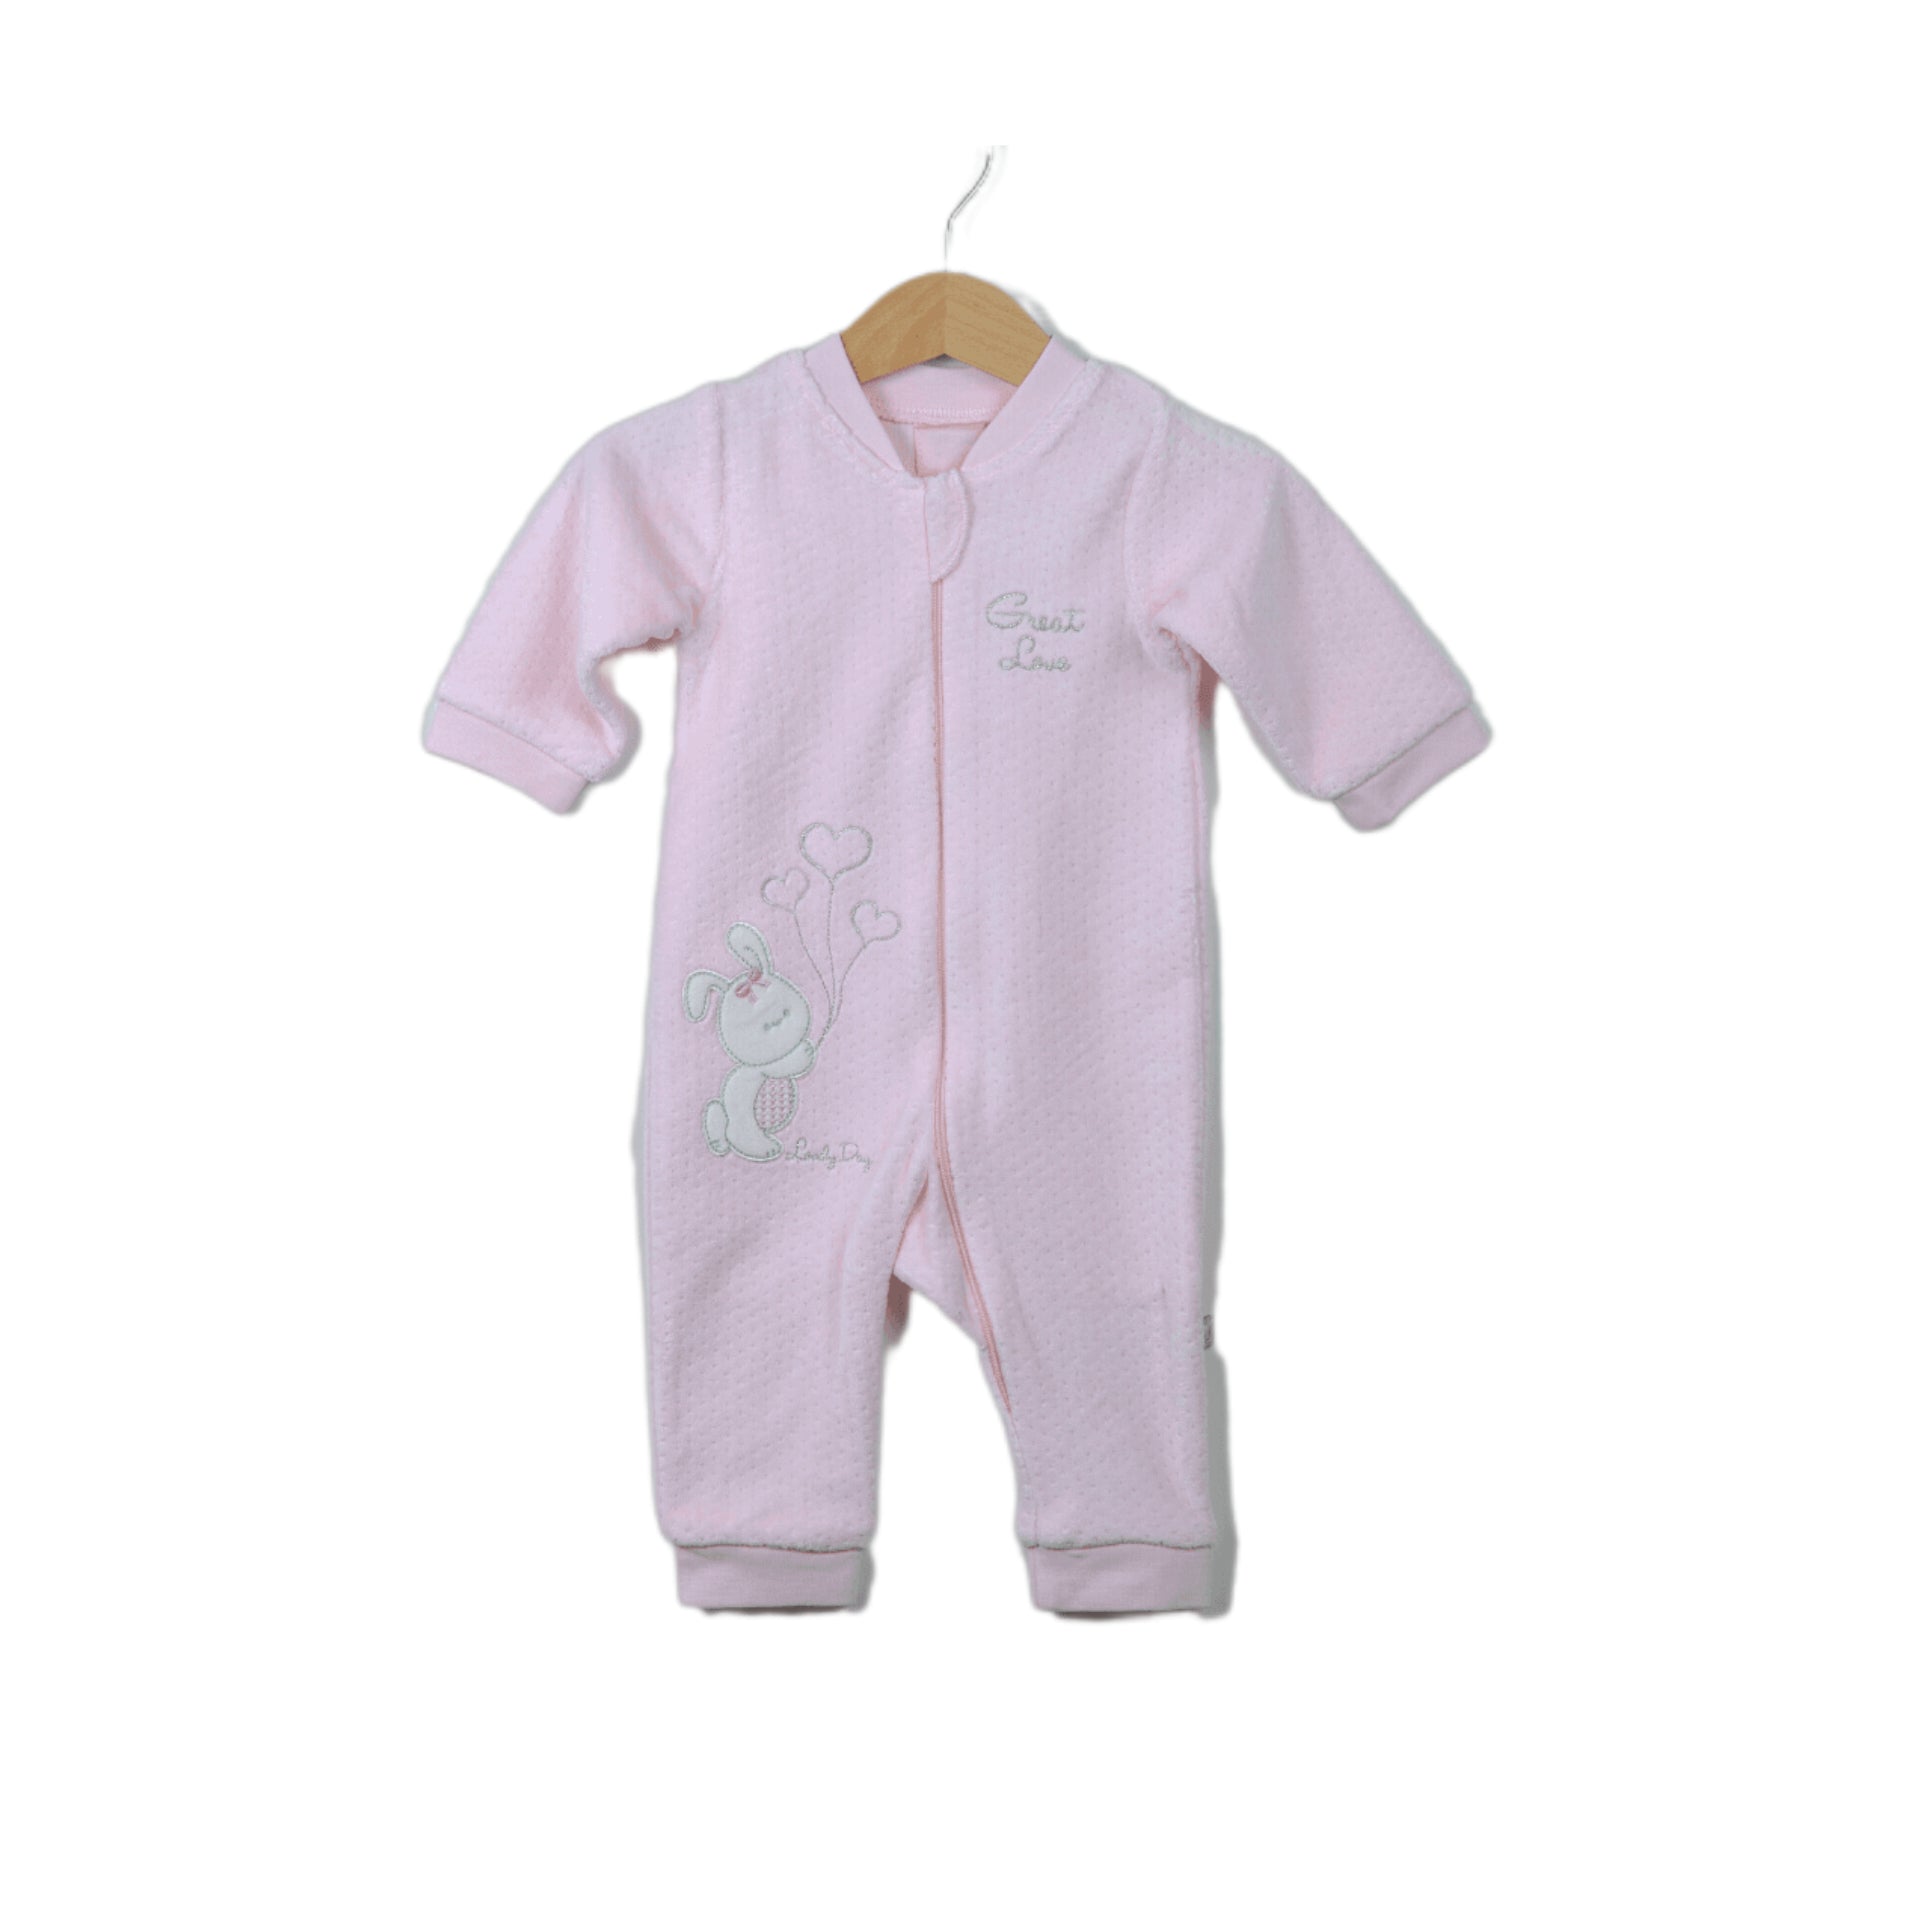 Bunny Pink Velvet Pajama - Bunny Pink Velvet Pajama - 3-6 Months - Bebetto - Melymod